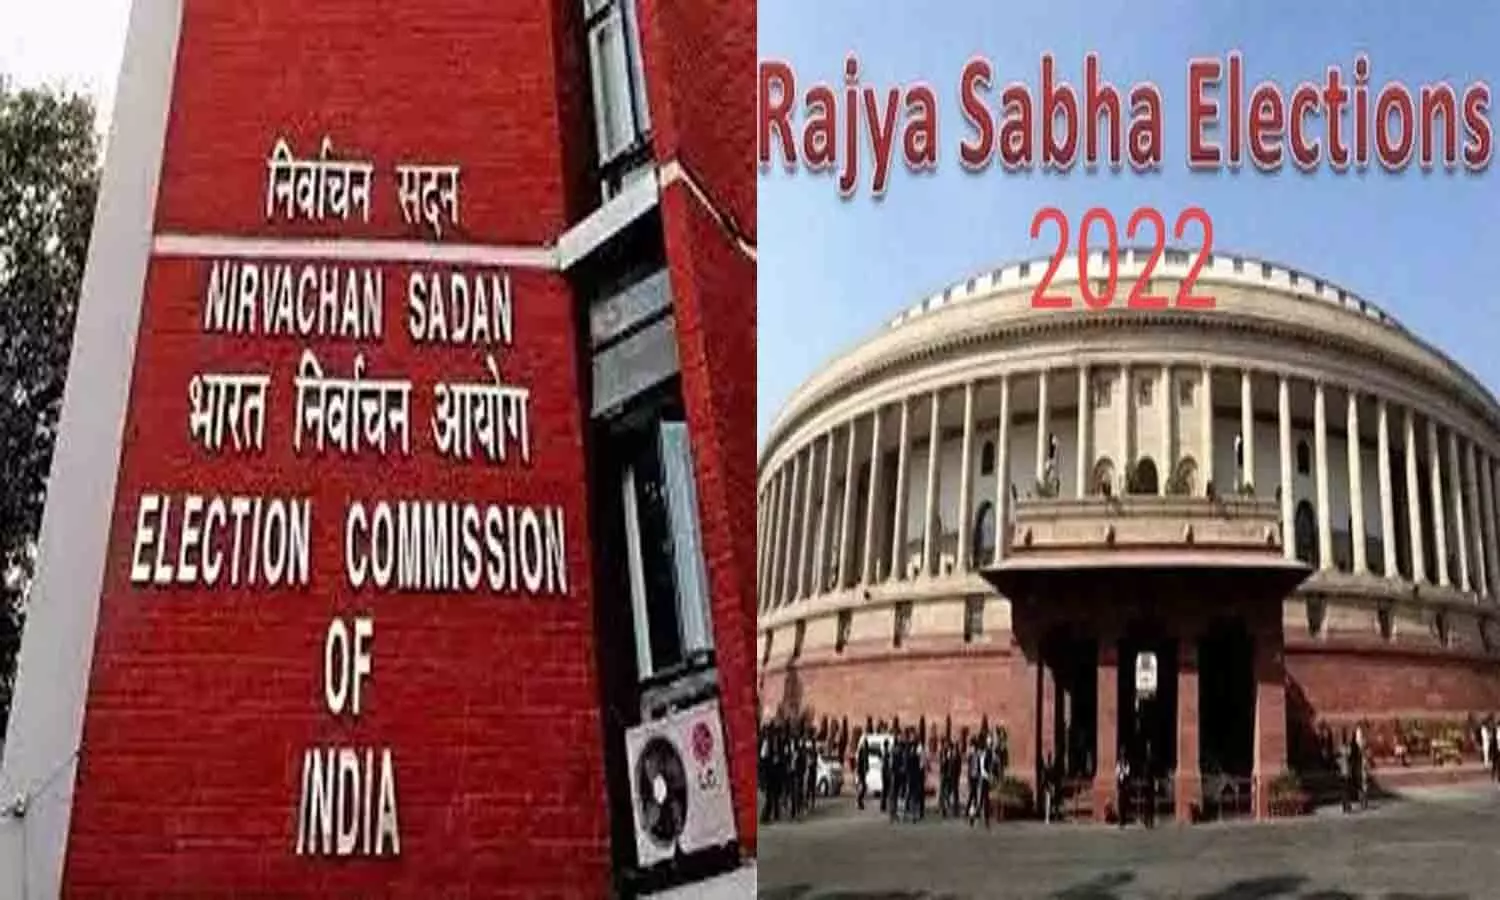 Rajyasabha Election 2022: Announcement of election date for 13 seats, voting will be held in the seats of these states